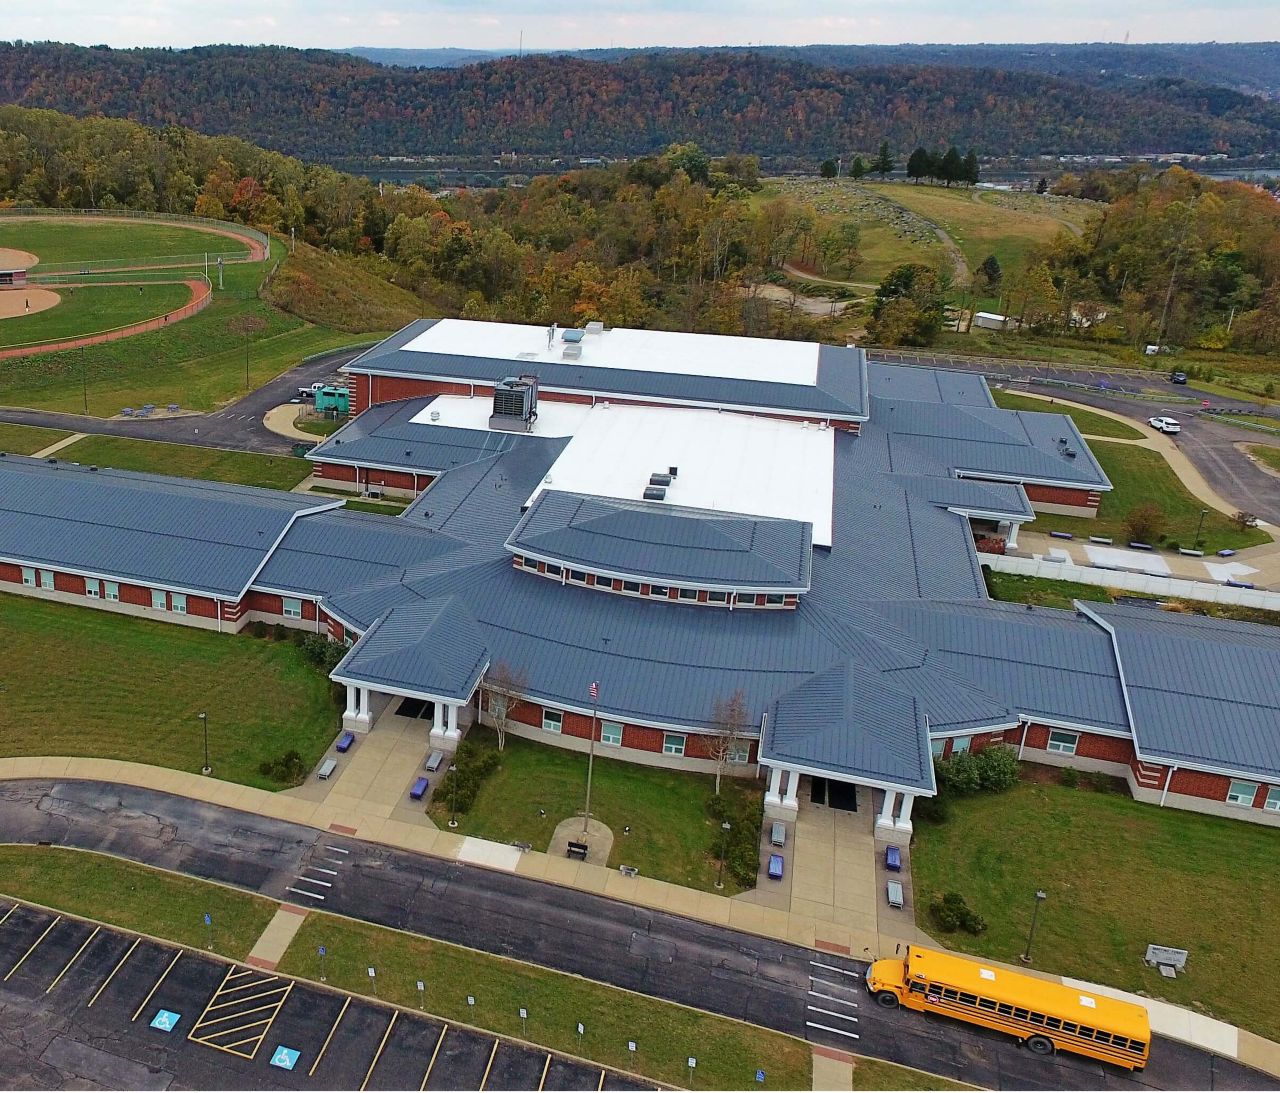 Martins Ferry Public School with a Sarnafil Membrane Roofing System